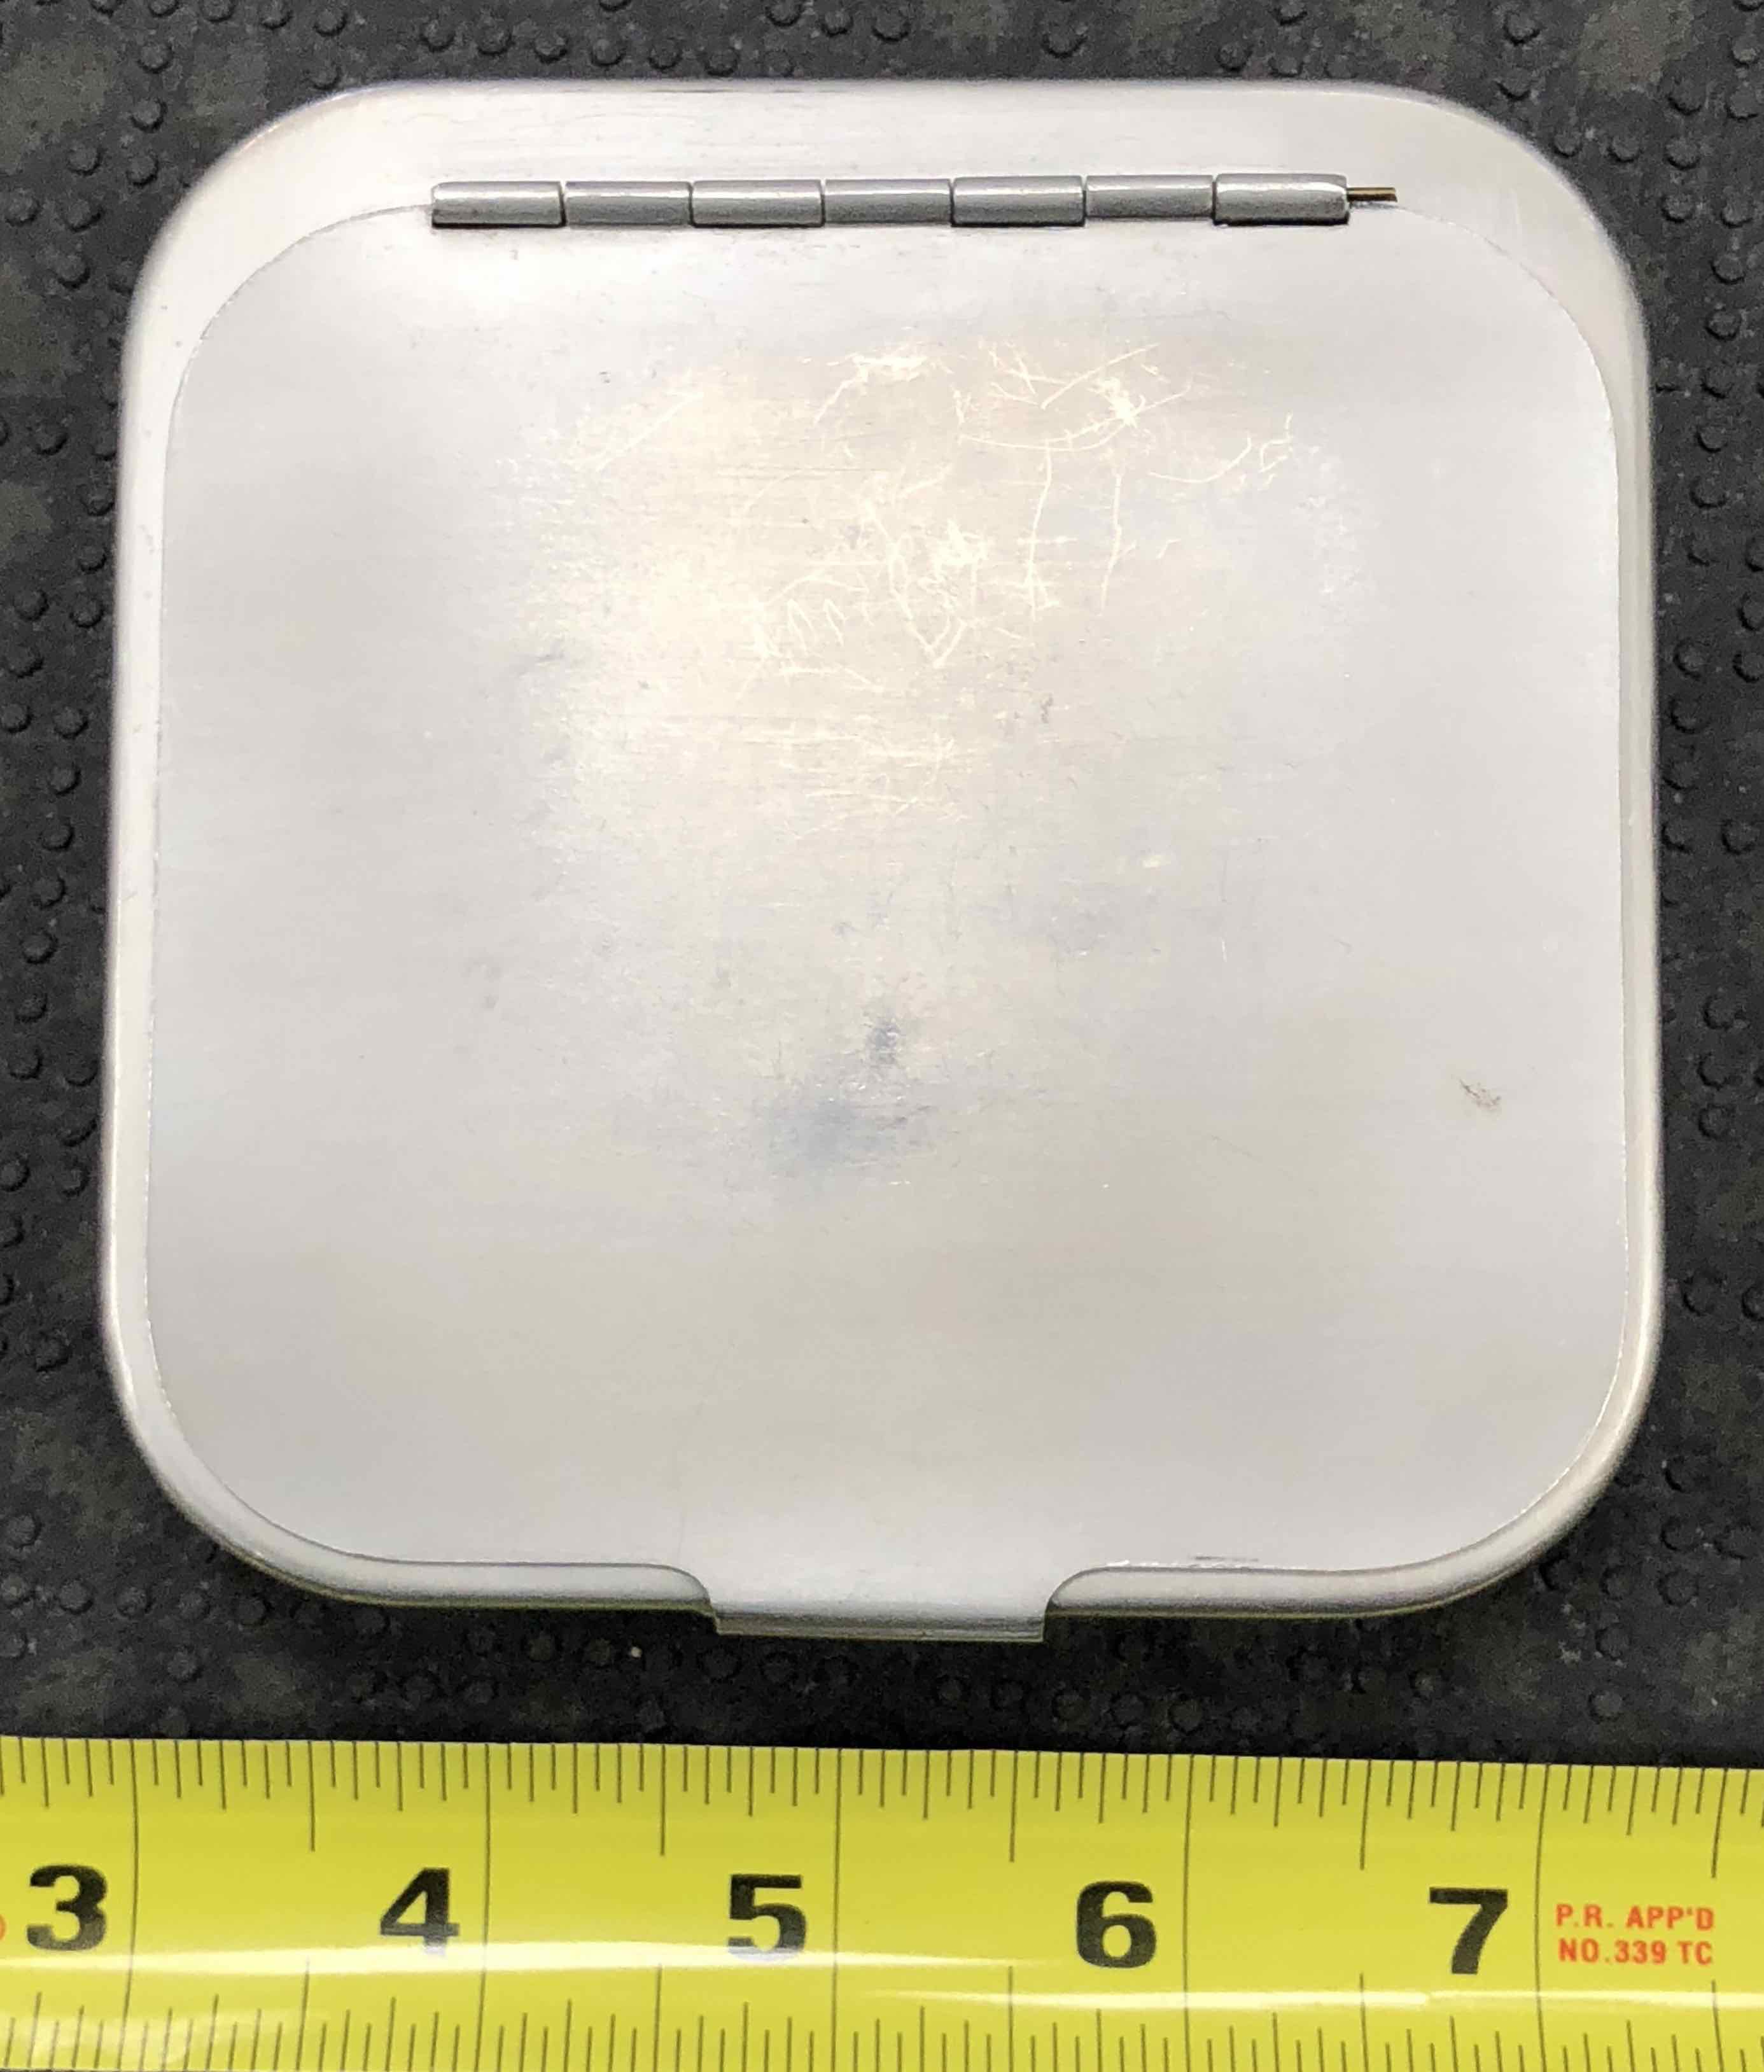 Richard Wheatley - Silver Aluminum Fly Box - 10 clips / 4 Rows & 7 Clips / 5 Rows & Flip Top Compartment for Leaders - 4 1/4" x 4 1/4" x 1” - GOOD CONDITION! - $25